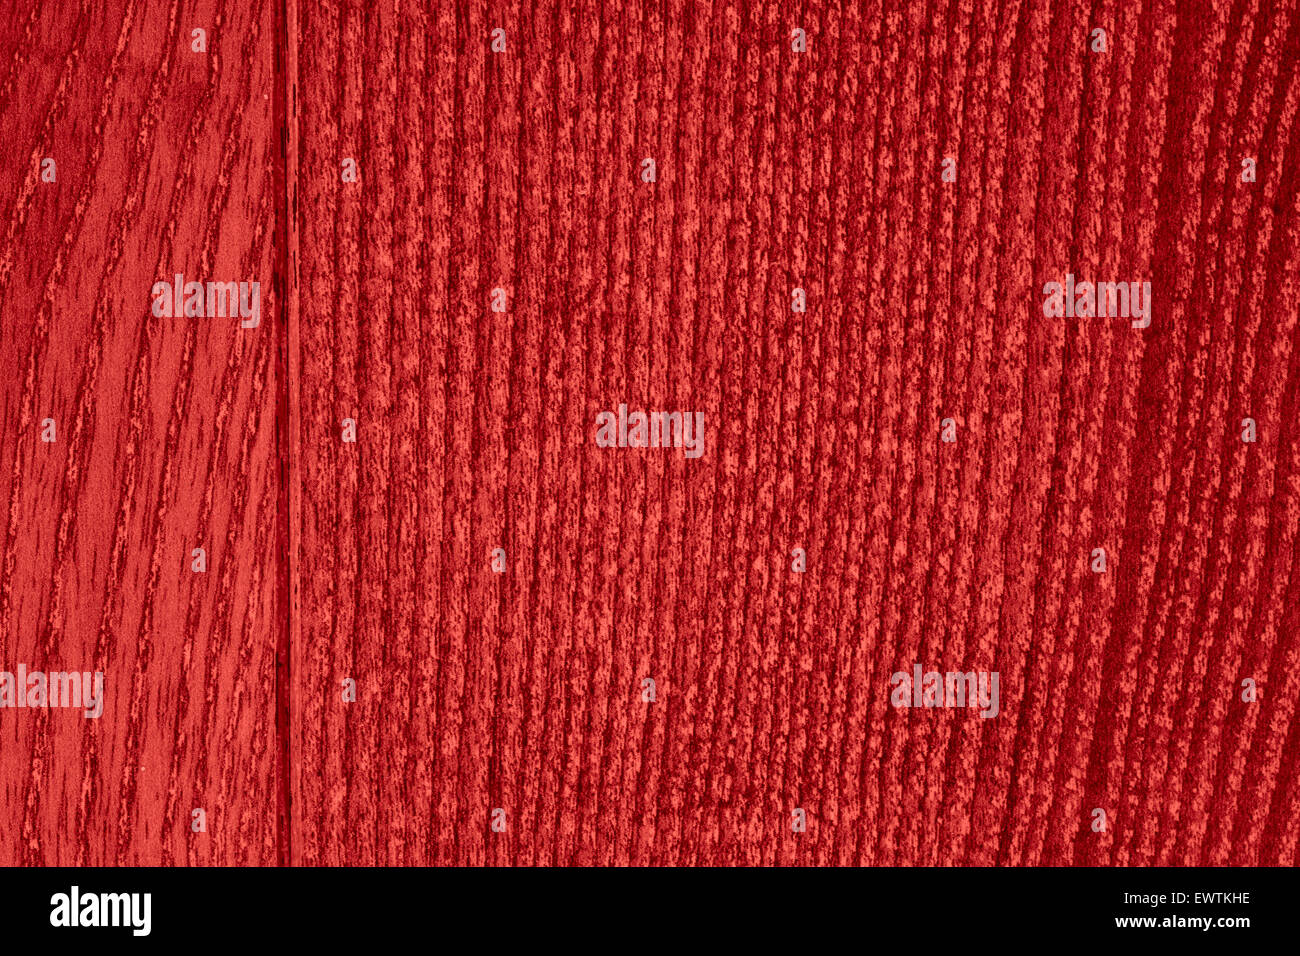 wood grain texture or oak plank red background with margin Stock Photo